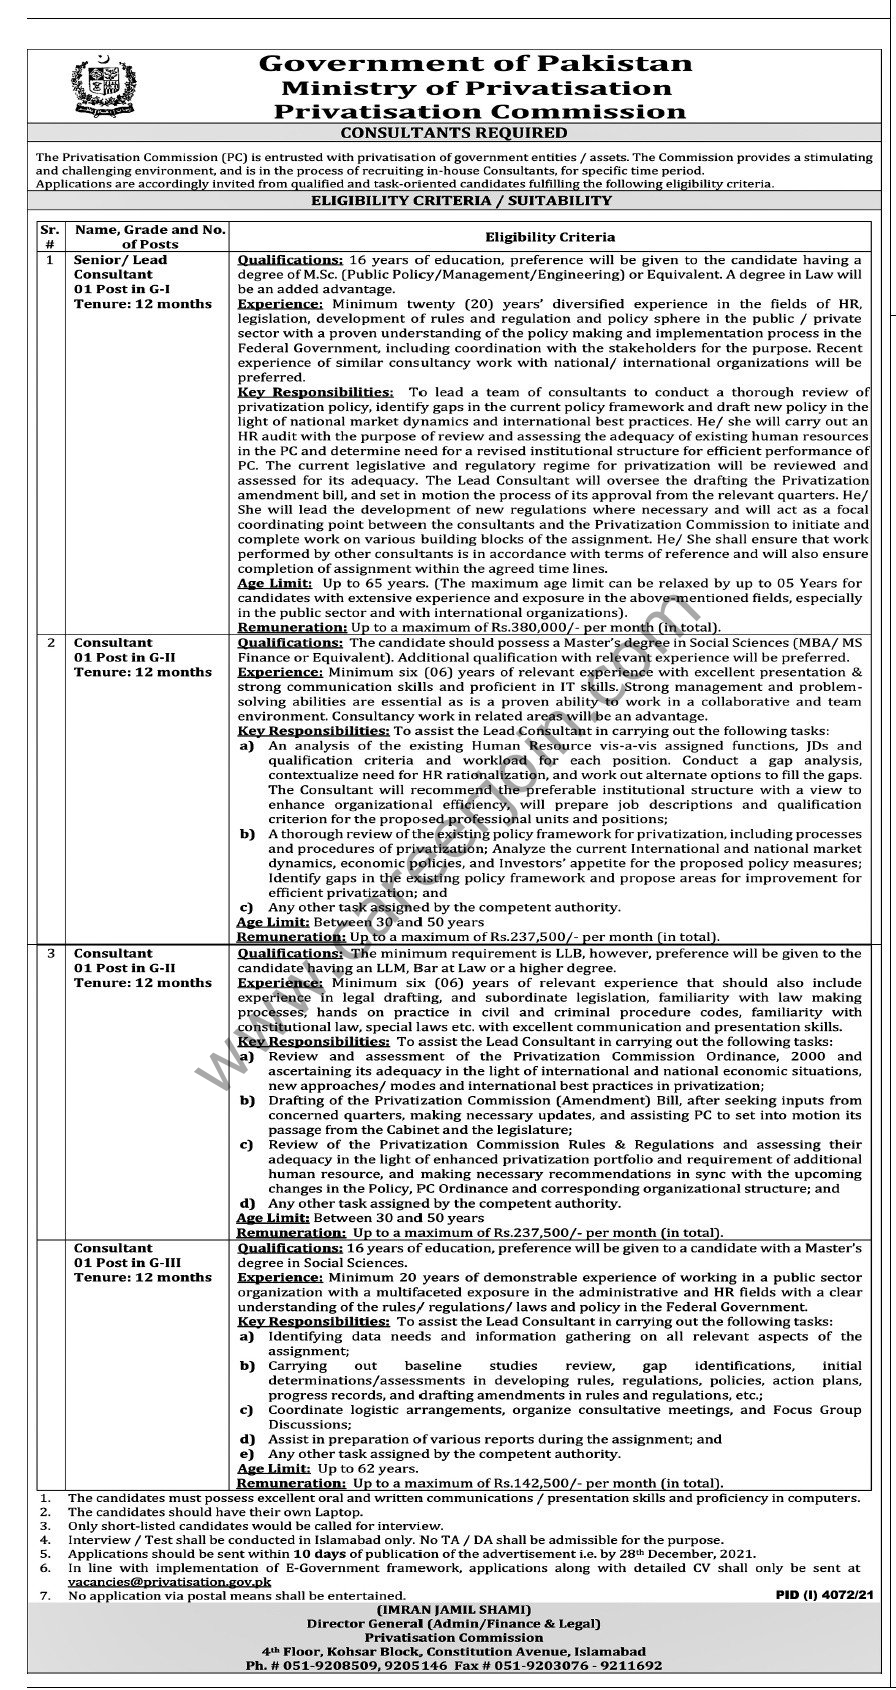 Govt Of Pakistan Ministry of Privatization Commission Jobs December 2021